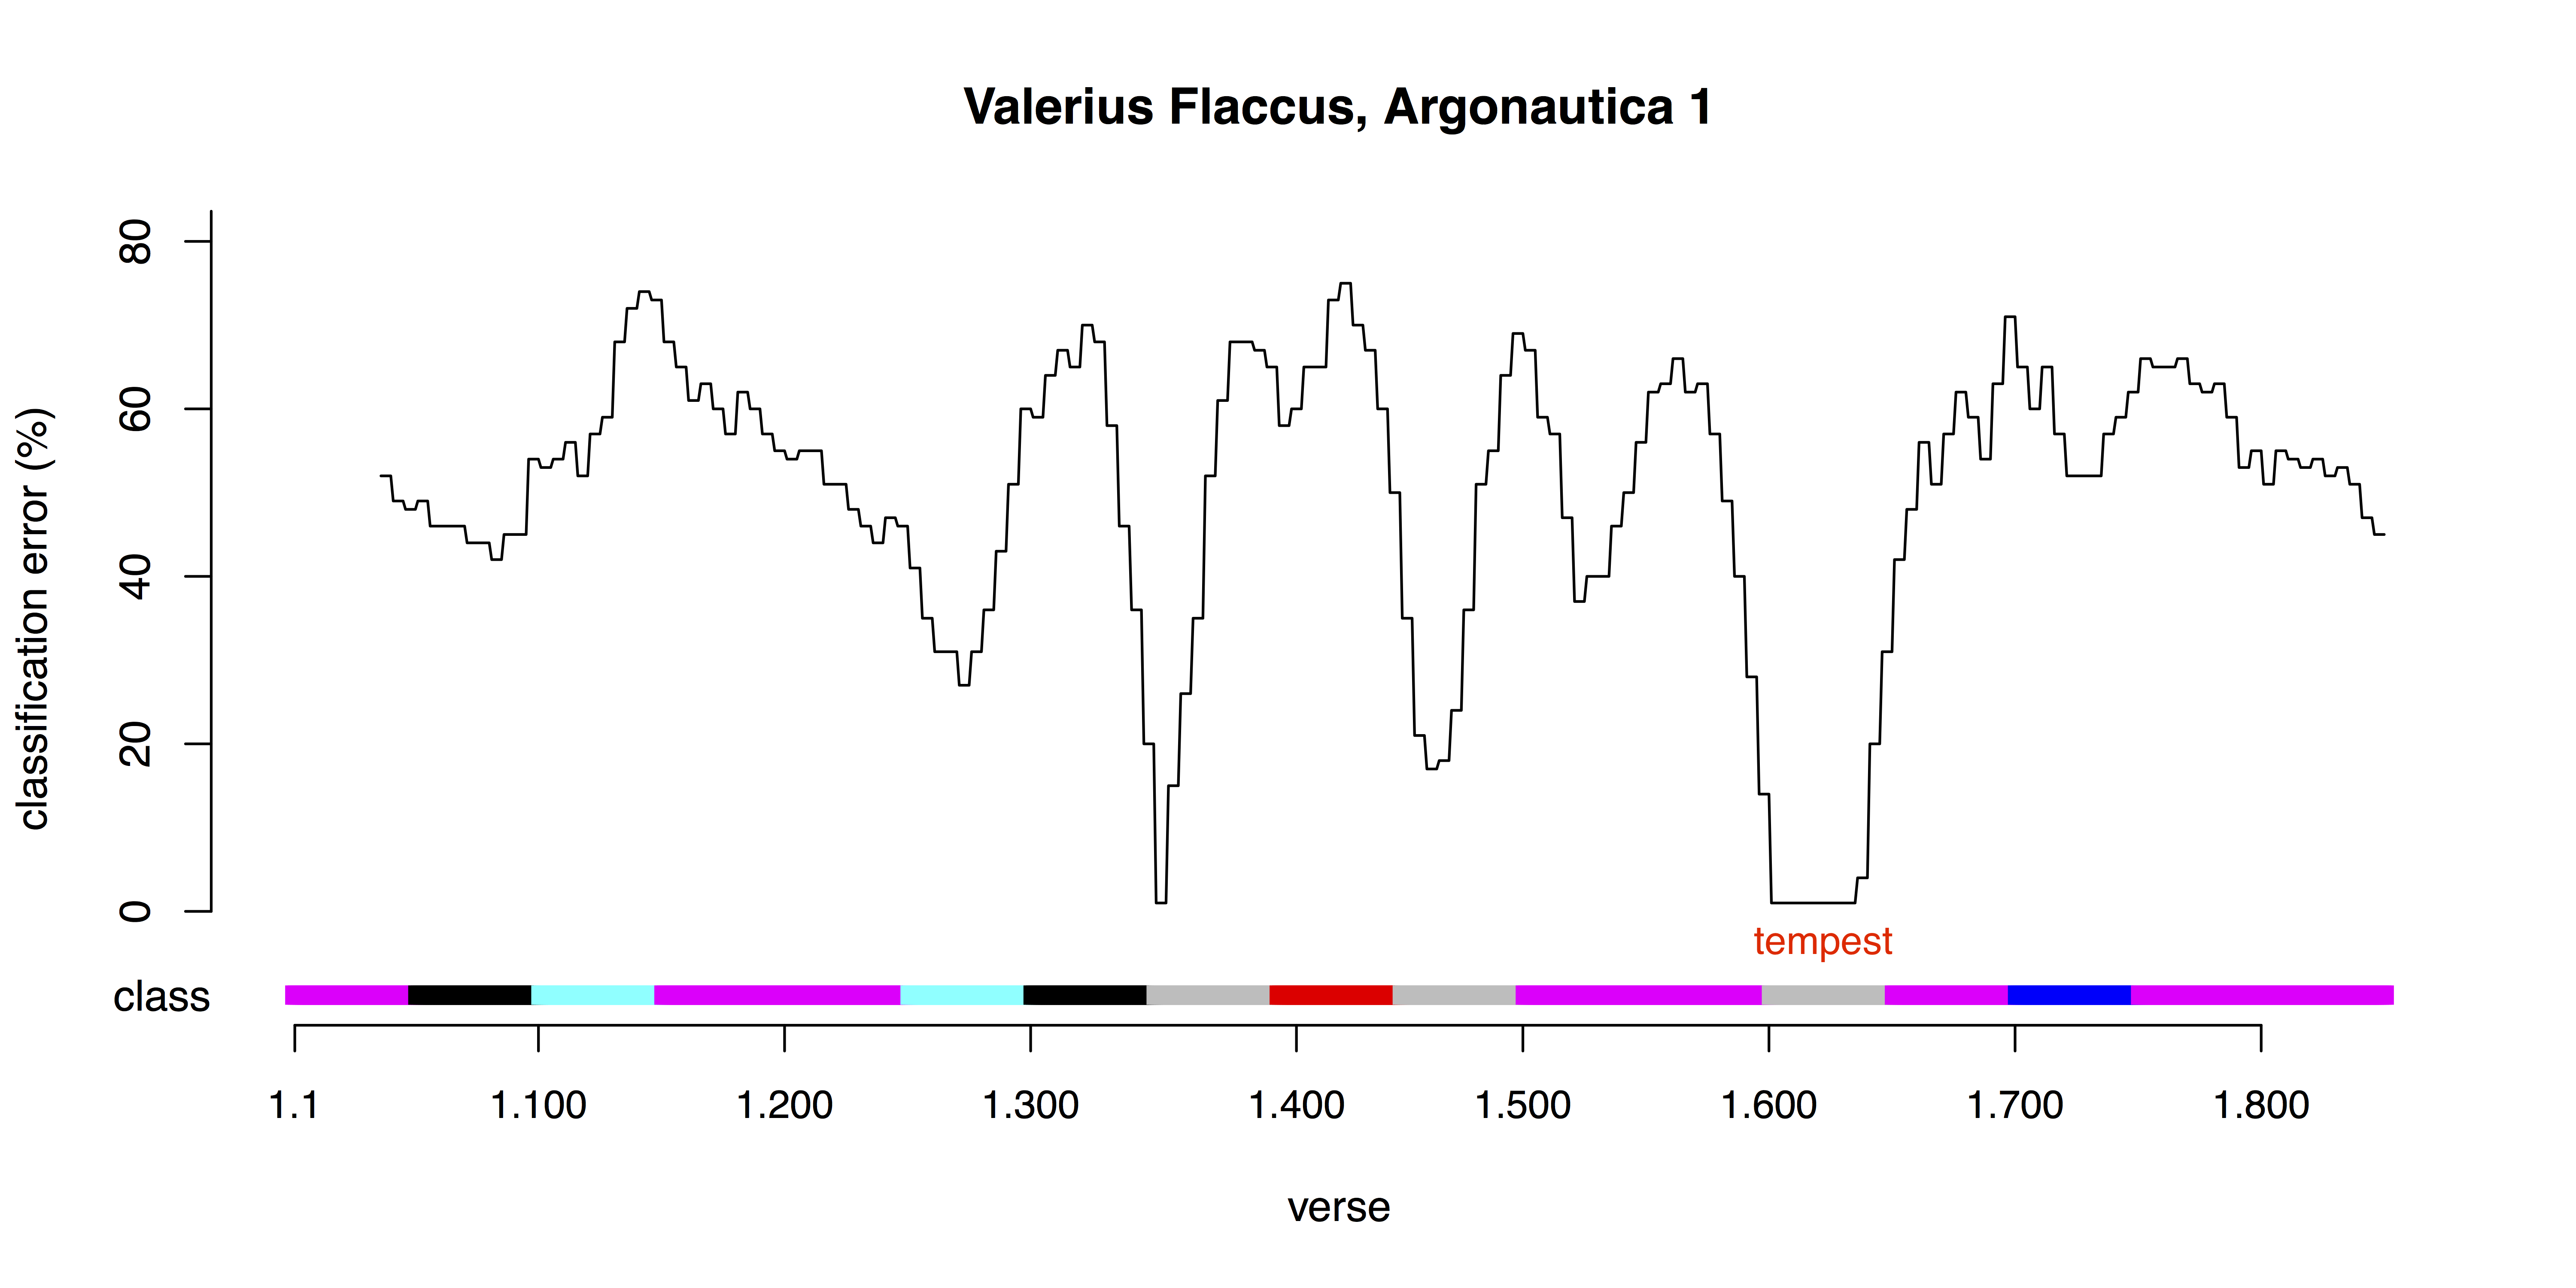 Figure 2. Valerius Flaccus, , book 1, after k-means classification with 8 classes. Line shows disagreement among repeated re-classifications; shaded bands show the same classes as in Fig. 1.